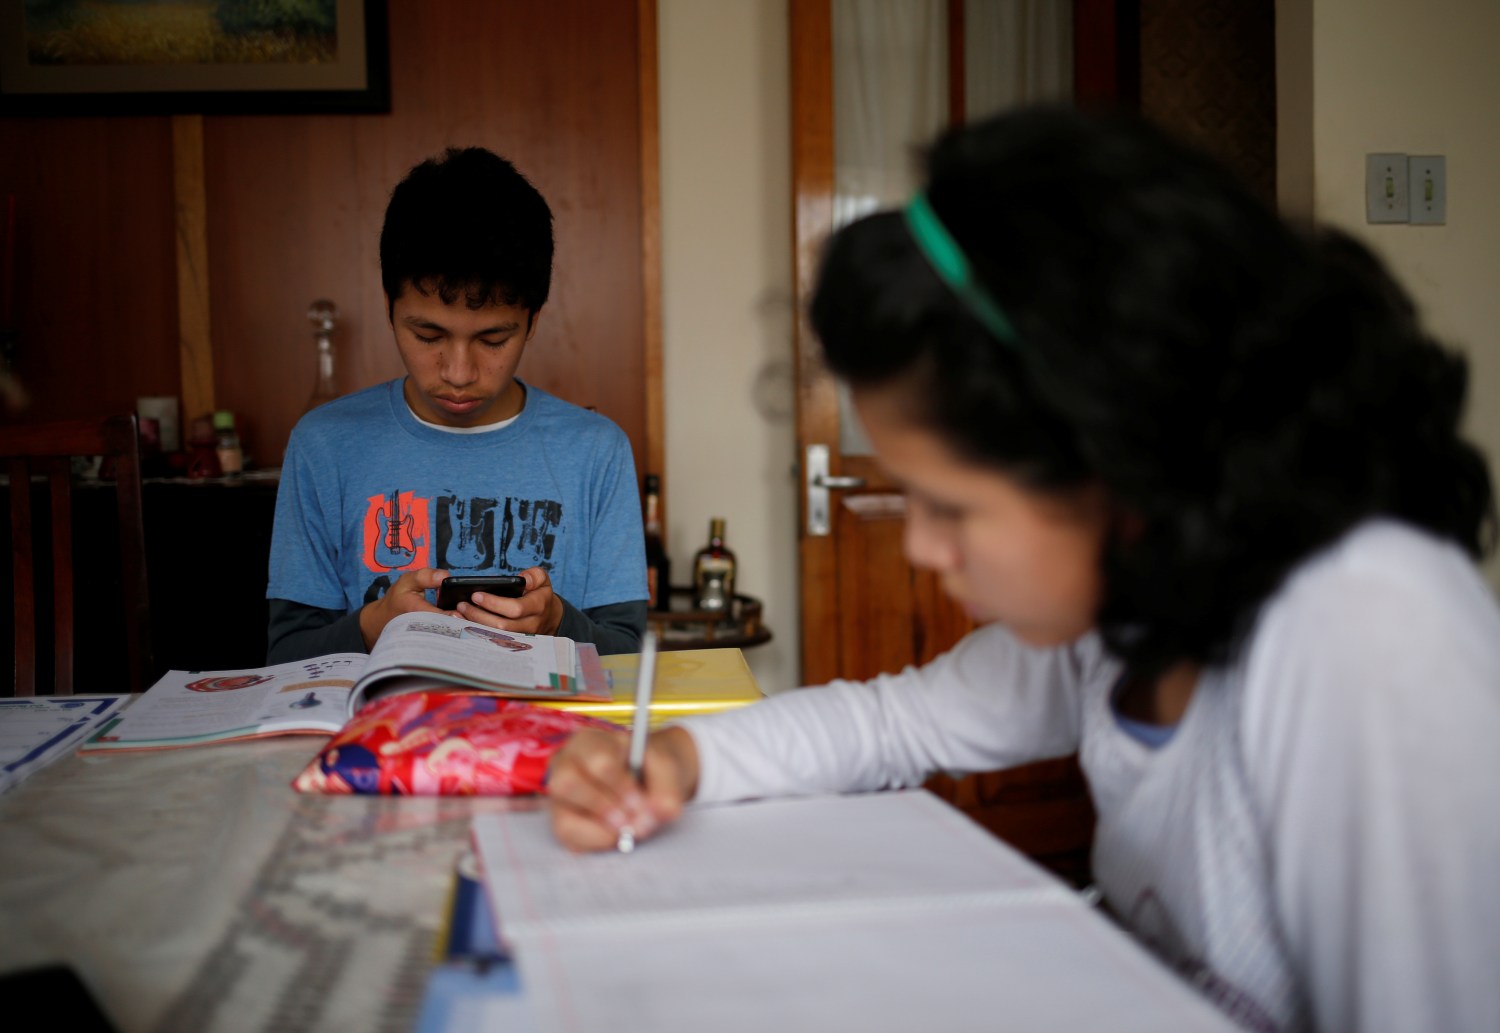 Sebastian Berrios and her sister Maria Fernanda study at home using electronic devices, as the country is under a nationwide quarantine to contain the coronovirus disease (COVID-19), in La Paz, Bolivia April 1, 2020. REUTERS/David Mercado